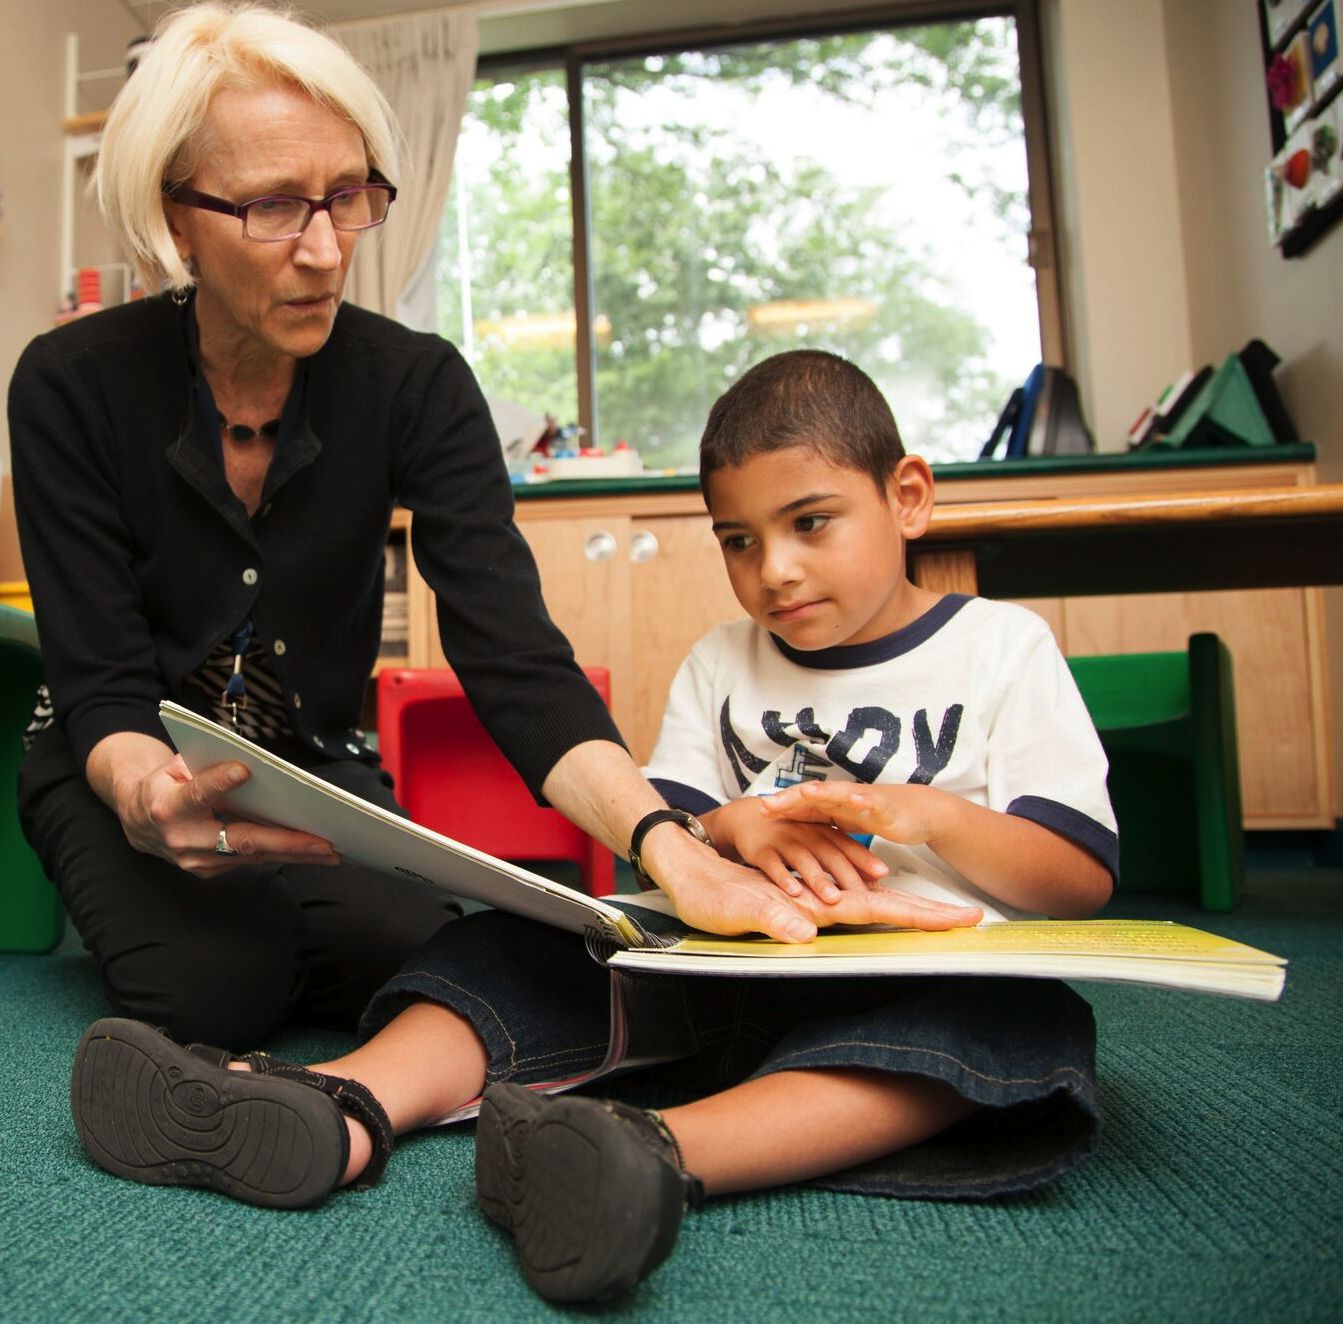 Teacher reading braille book with young boy